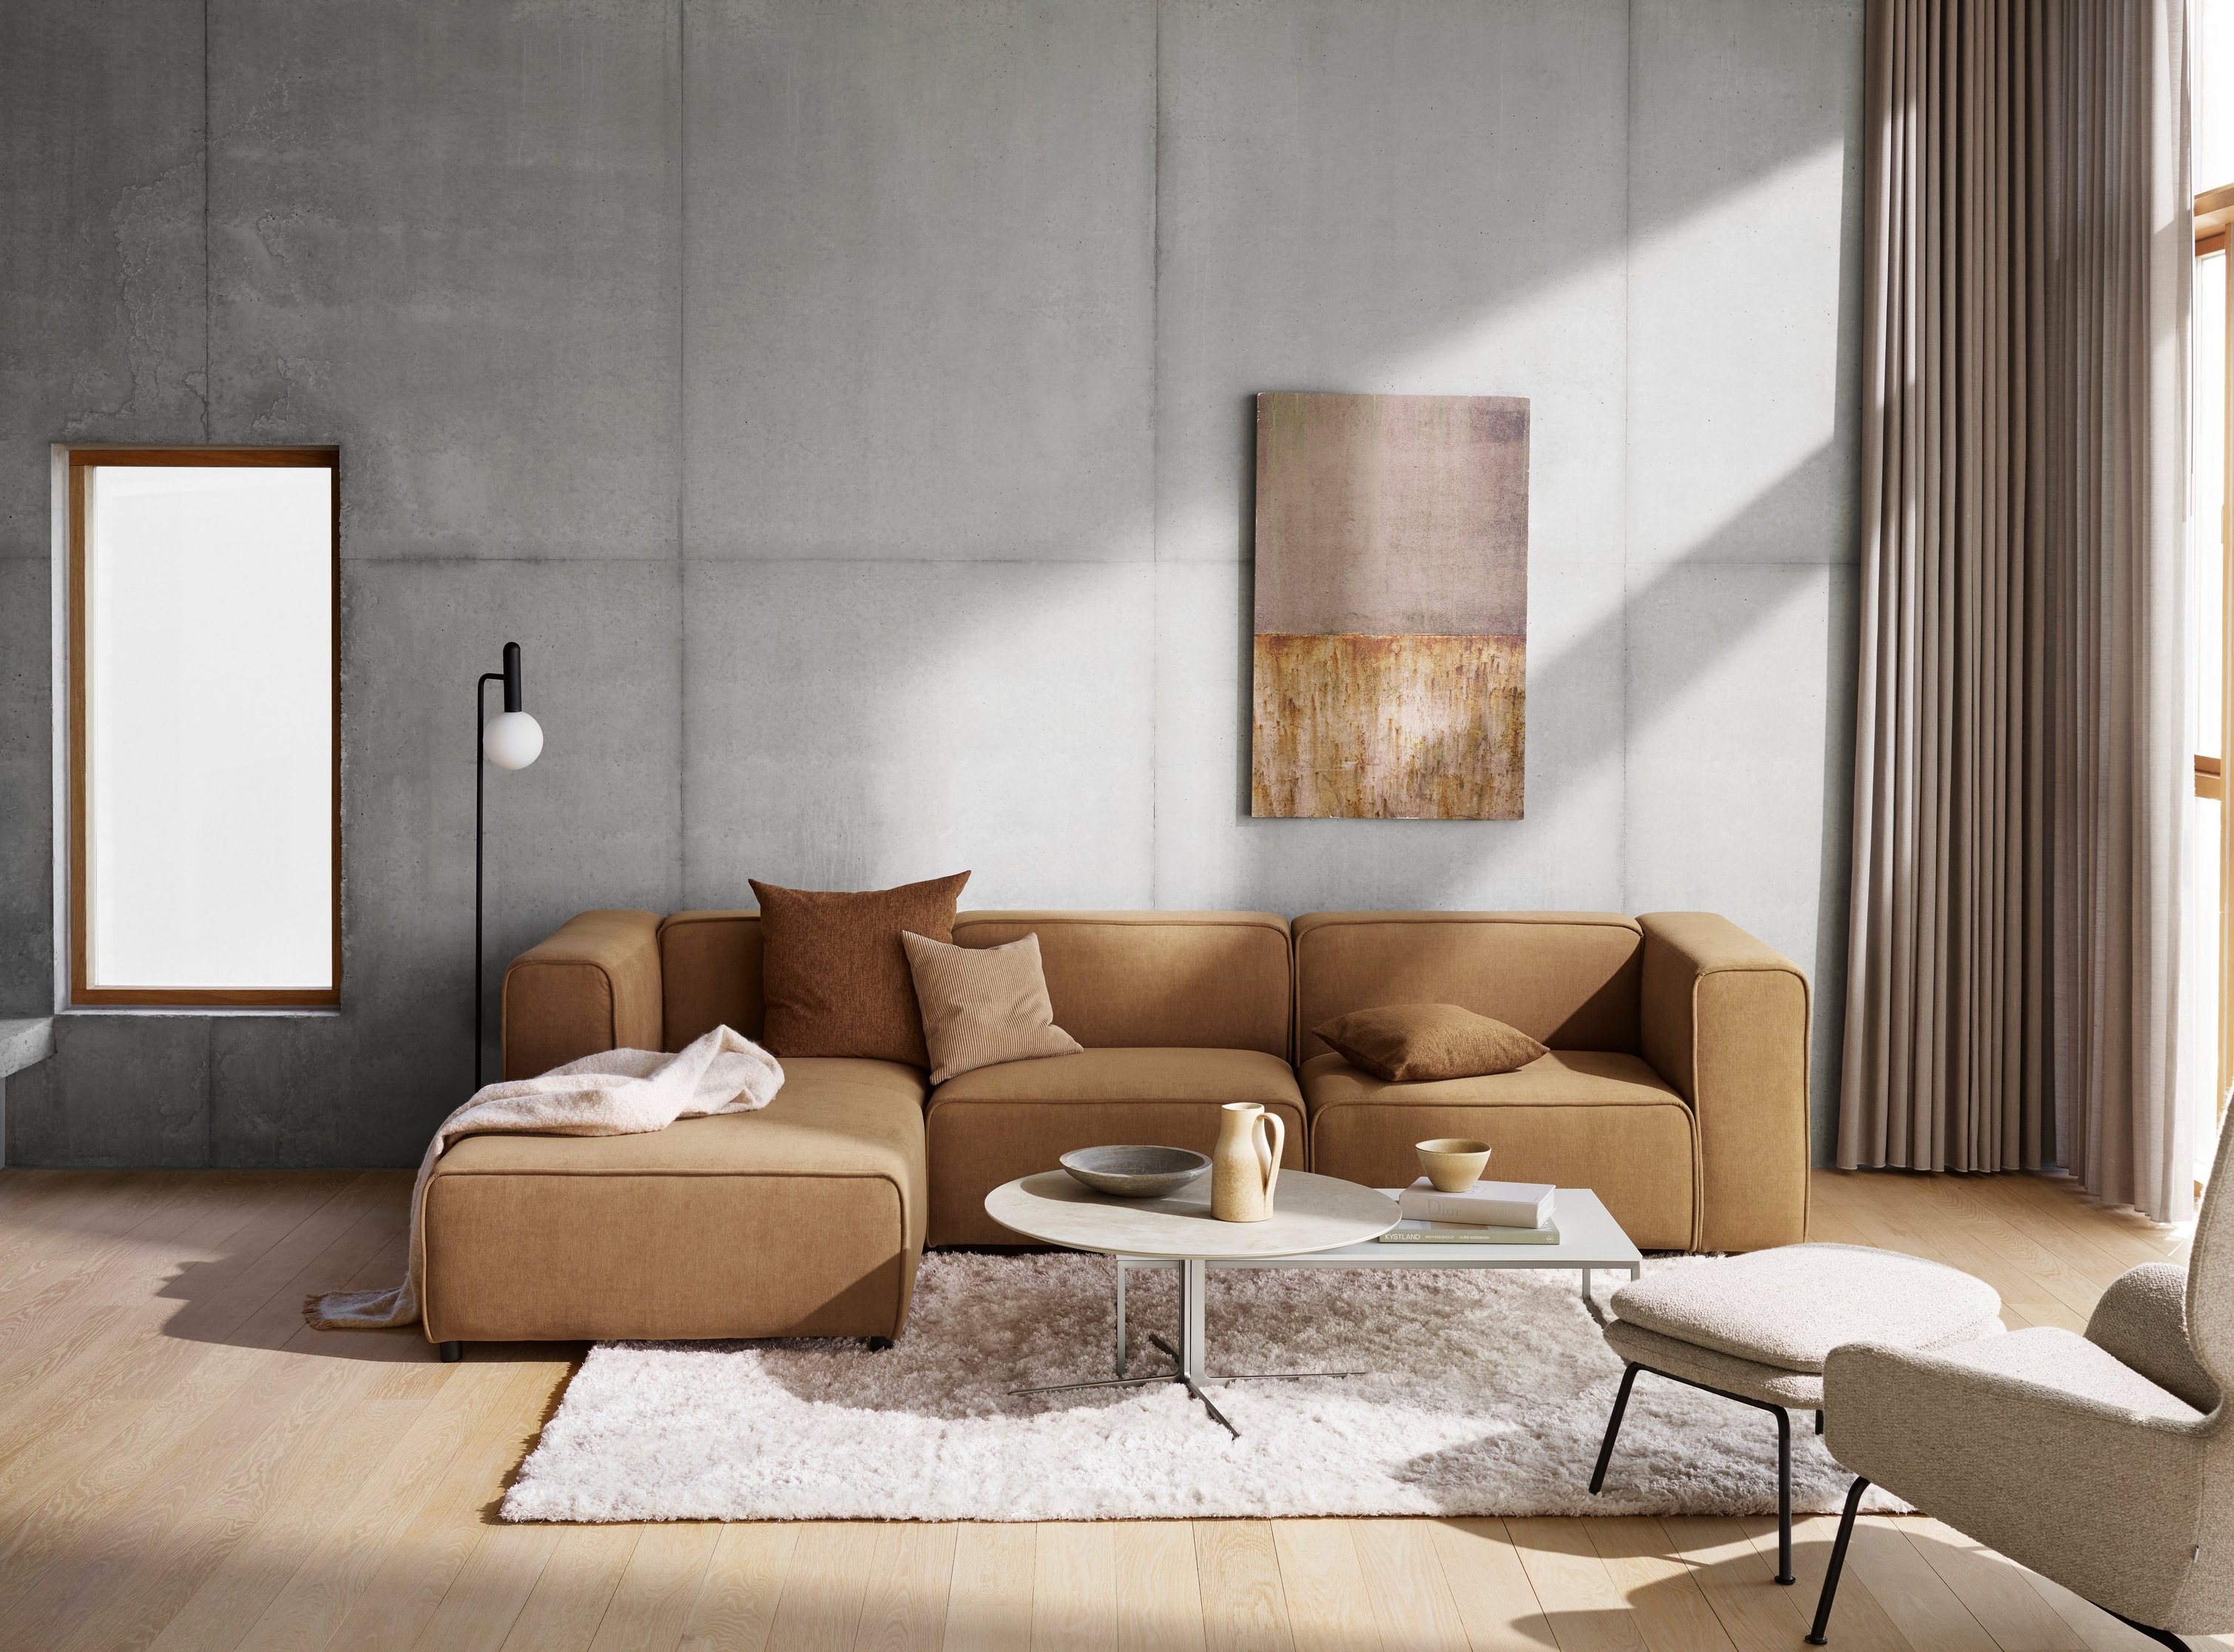 Modern living room with beige sectional sofa, abstract wall art, and plush rug on wooden floor.